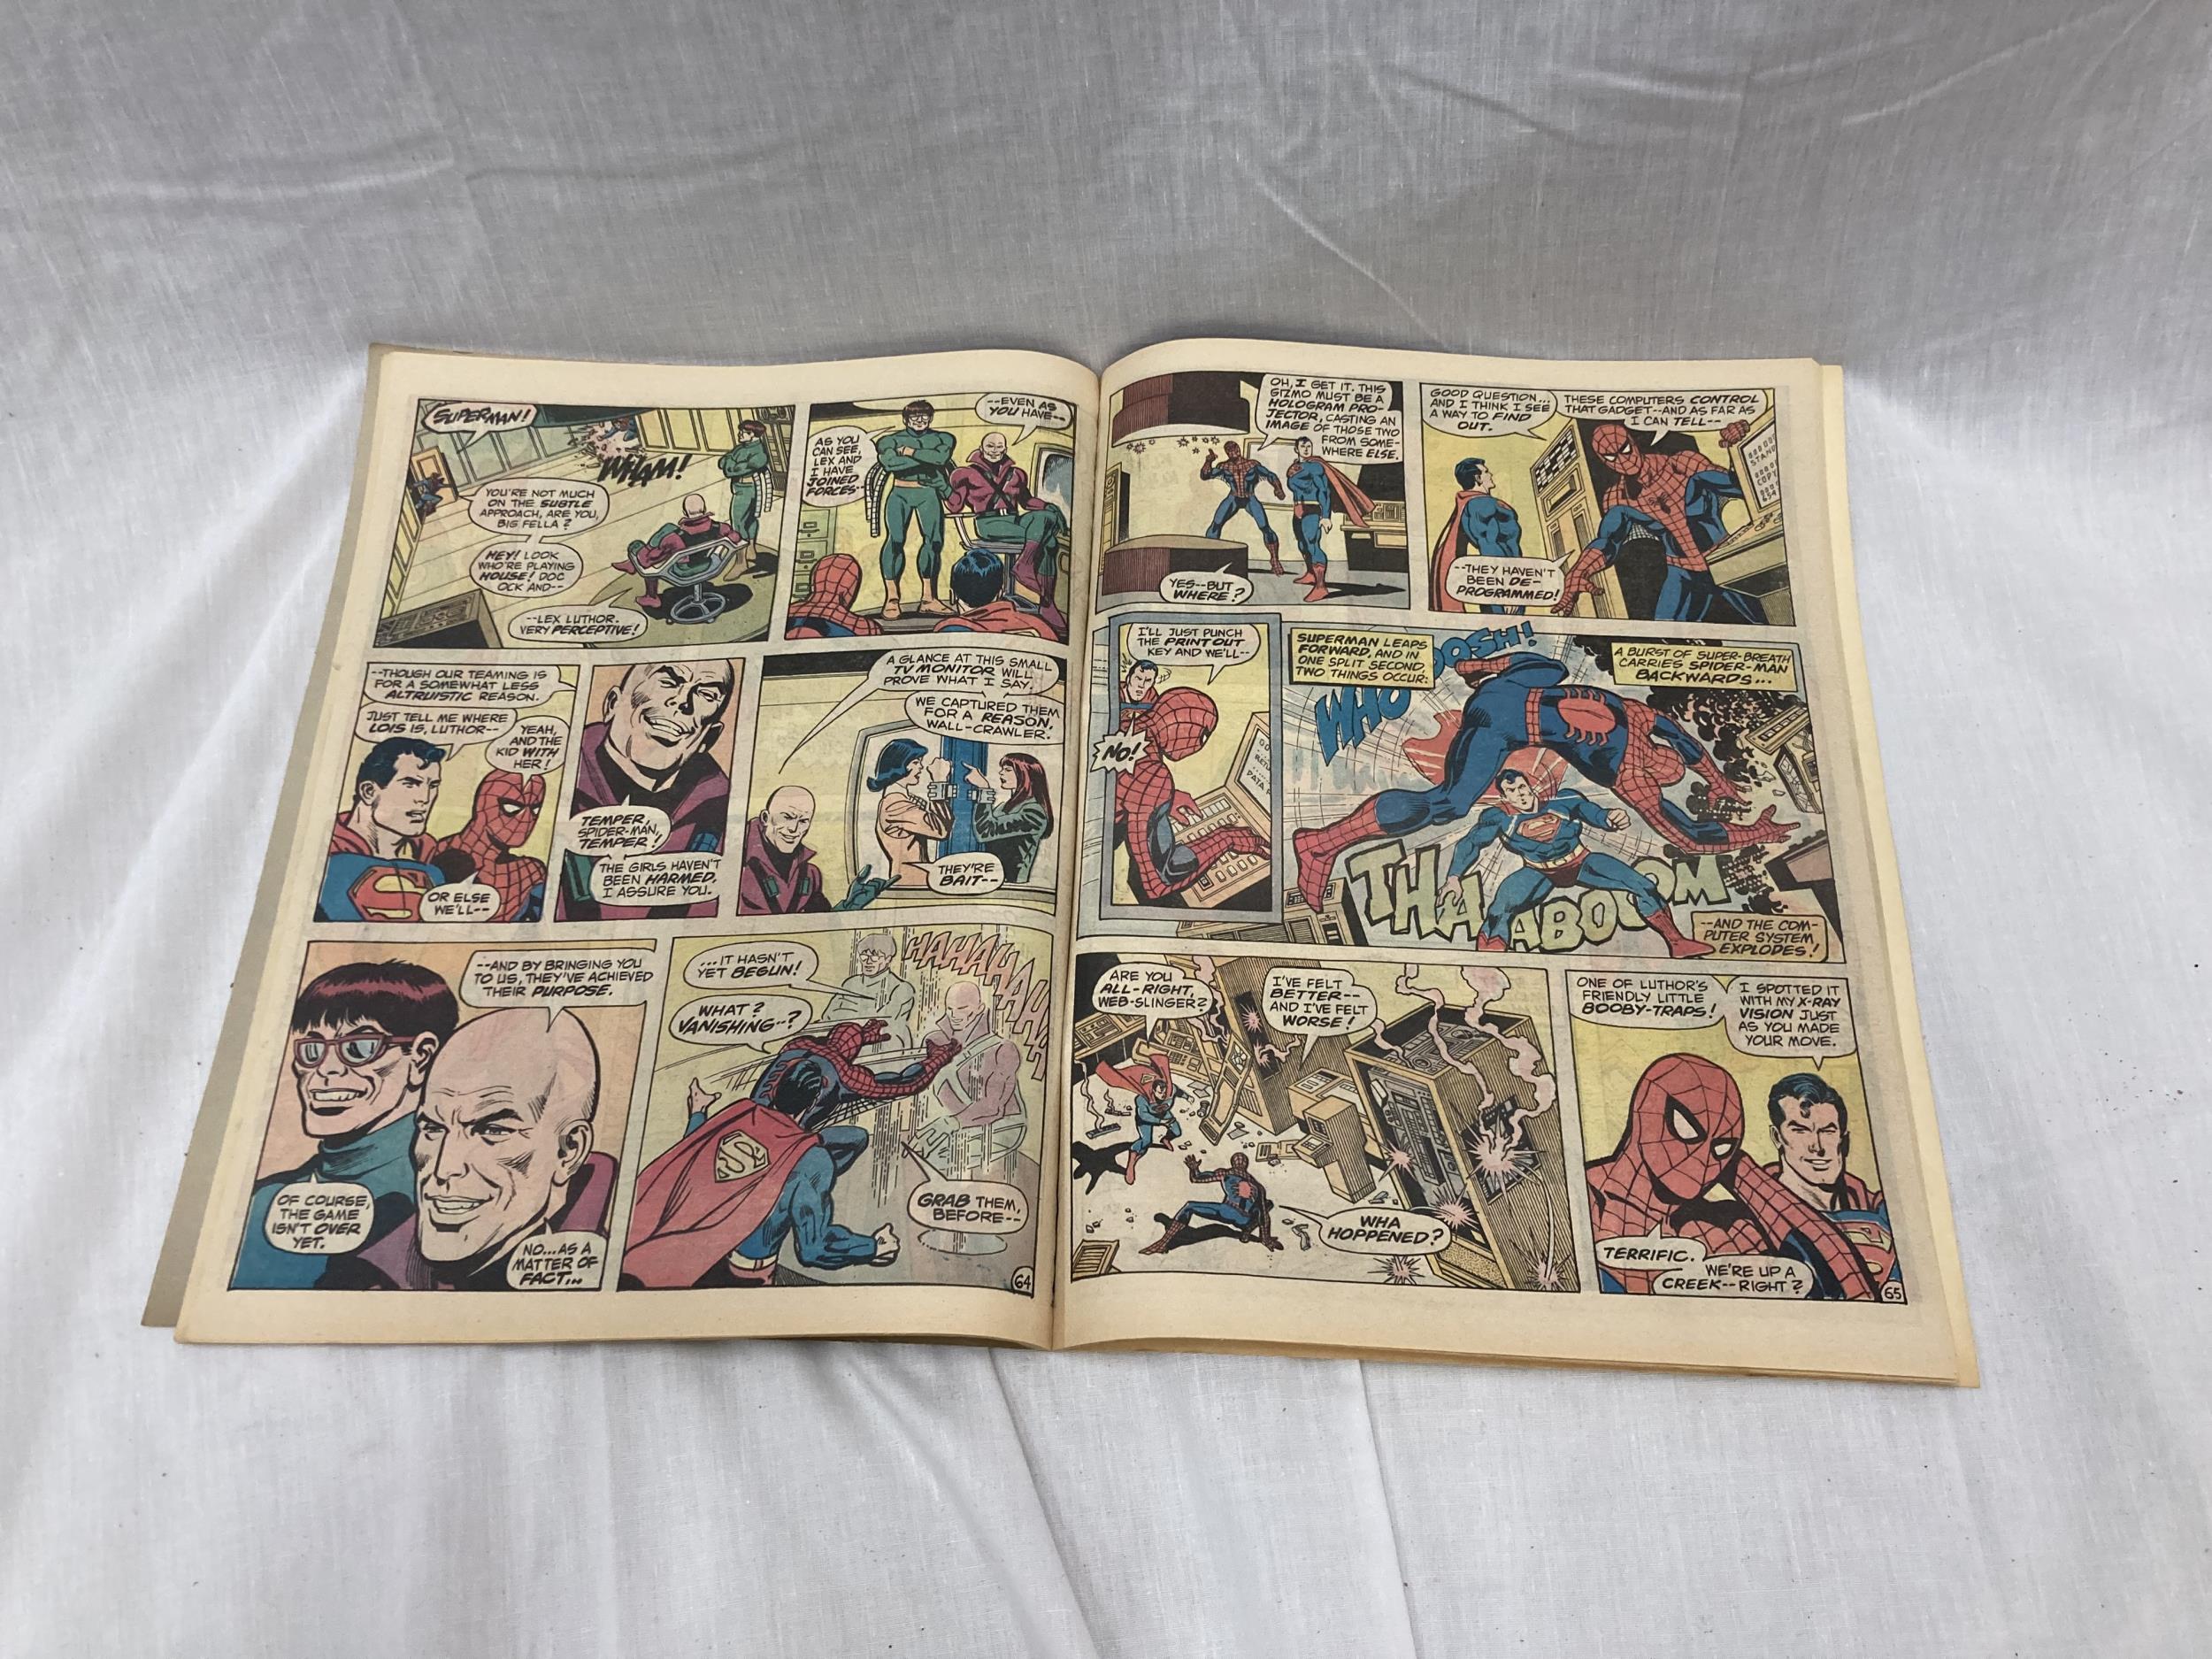 A DC AND MARVEL VINTAGE COMIC THE BATTLE OF THE CENTURY SUPERMAN V SPIDERMAN 1976 - Image 5 of 6